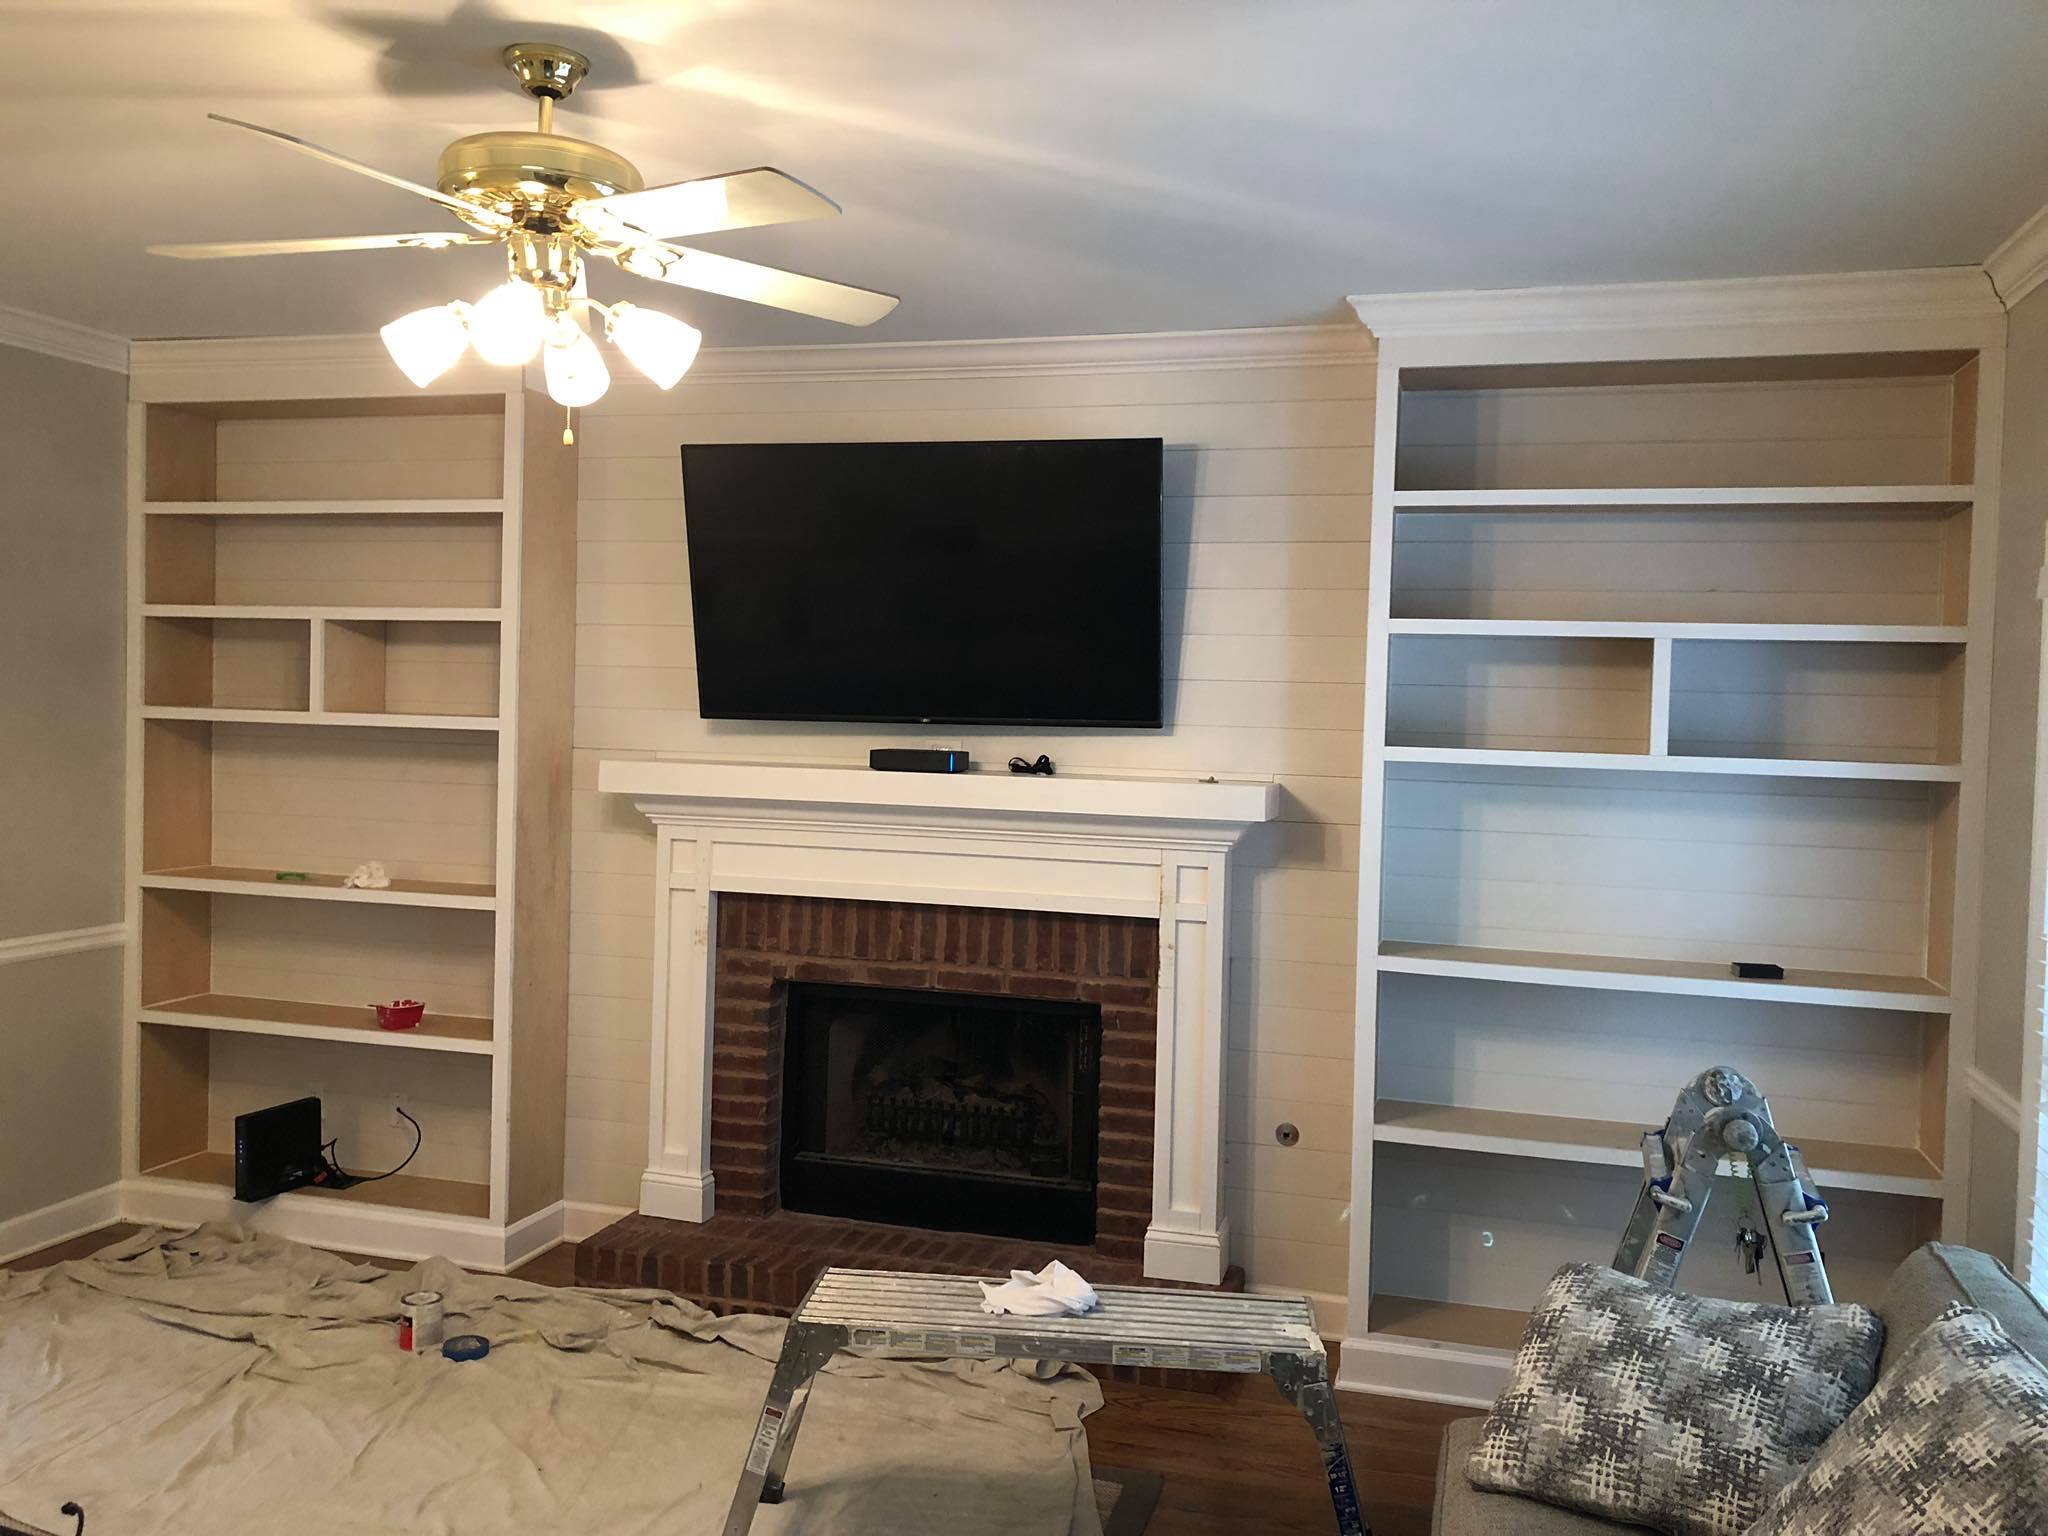 Fireplace Custom Wall High Built in Cabinets Shelves and Trim Painted White Installing 2